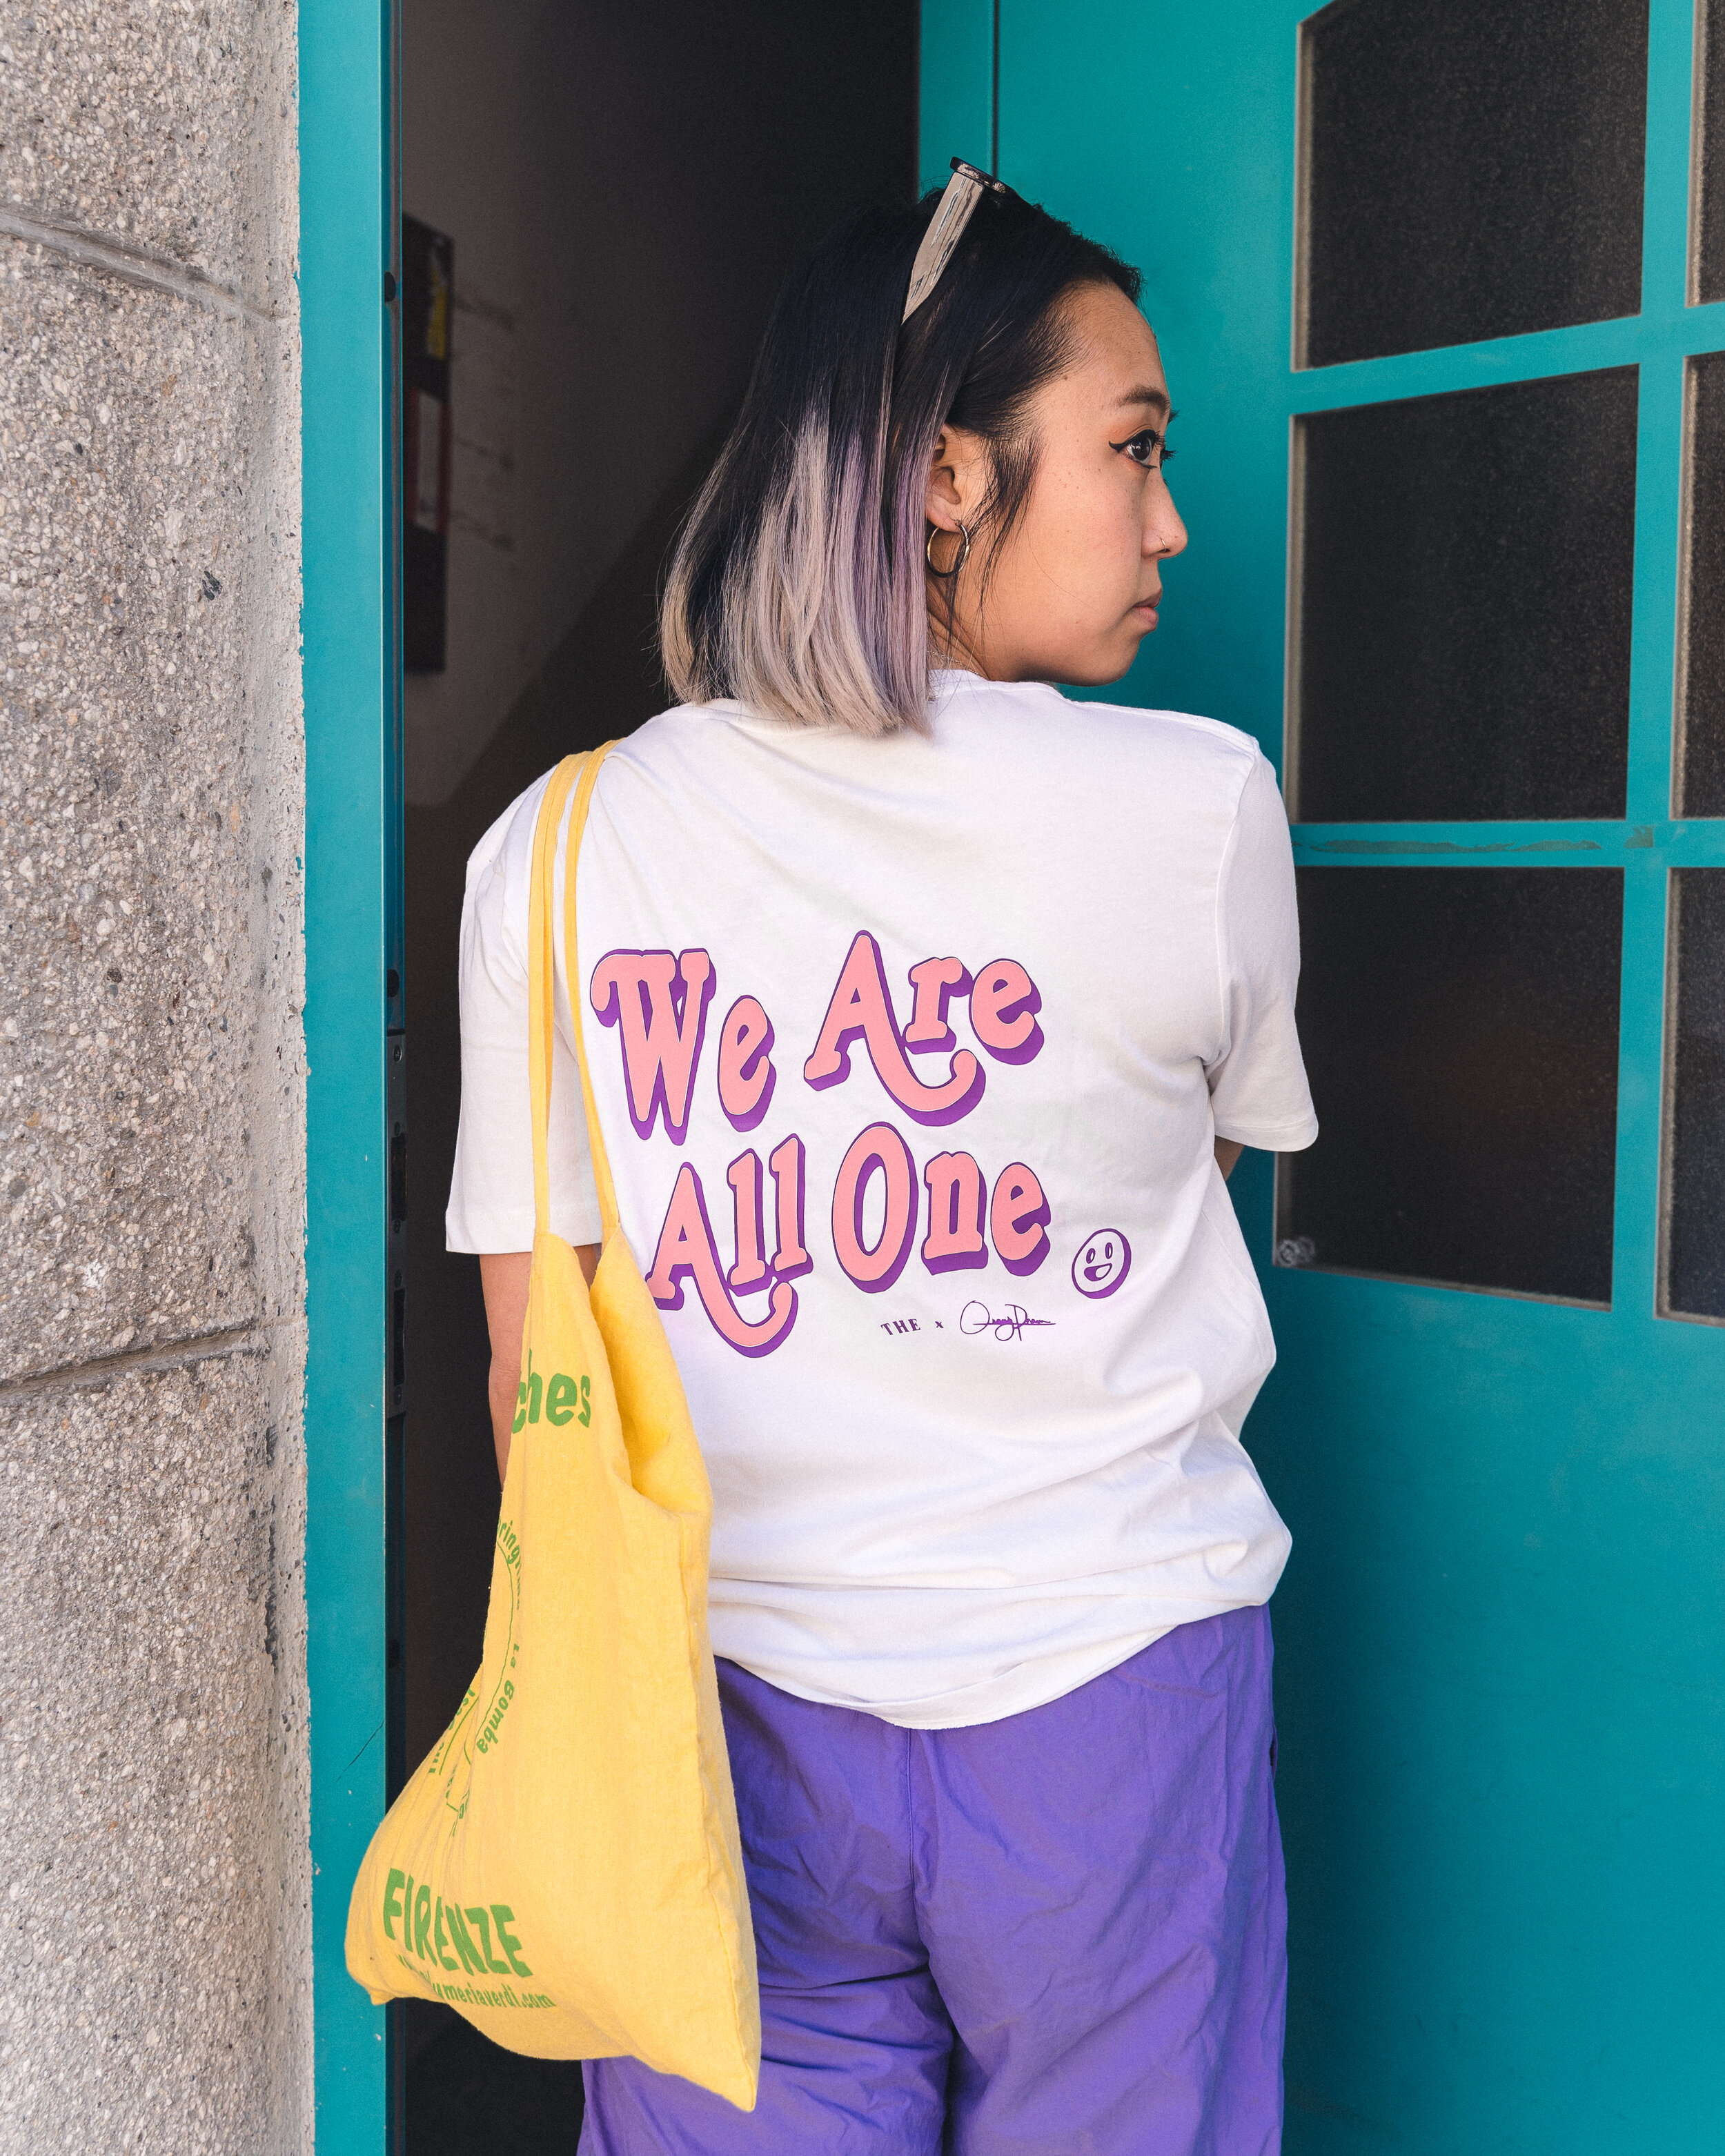 We Are All One shirt-5342-ig.jpg